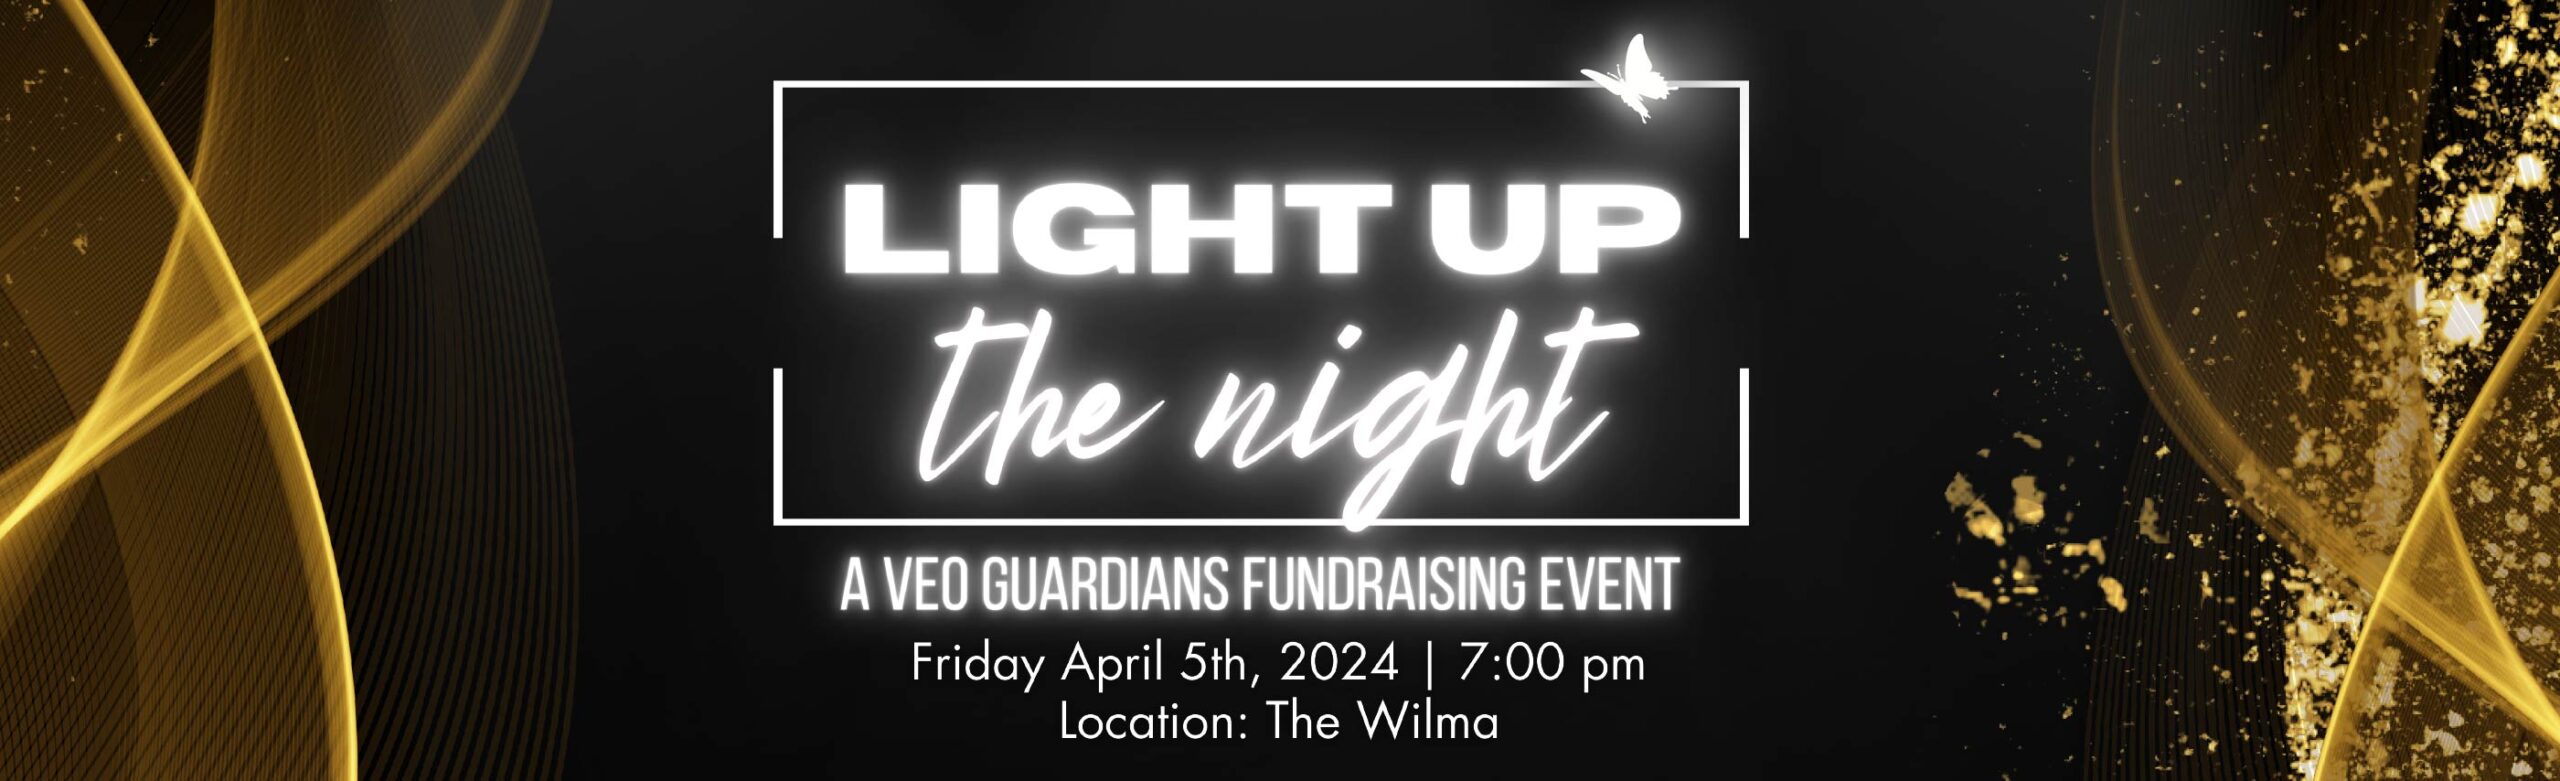 Light Up the Night with VEO Guardians